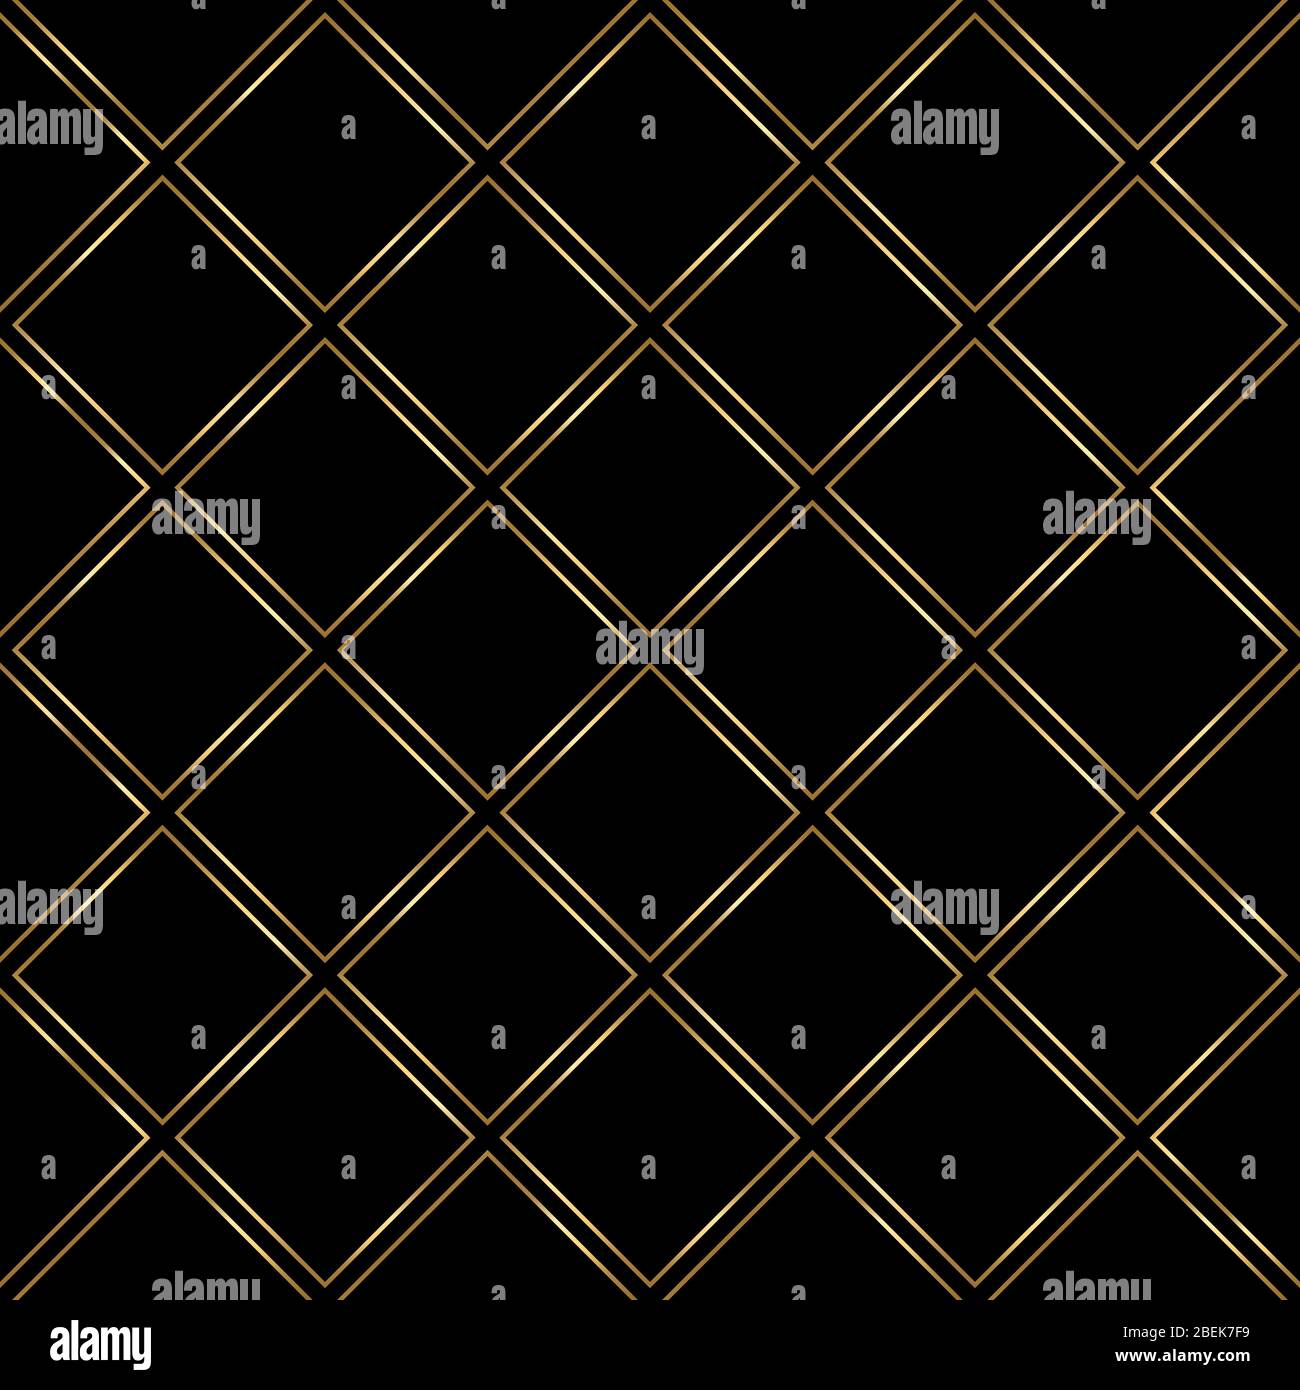 Gold and black pattern. Seamless luxury background Stock Vector